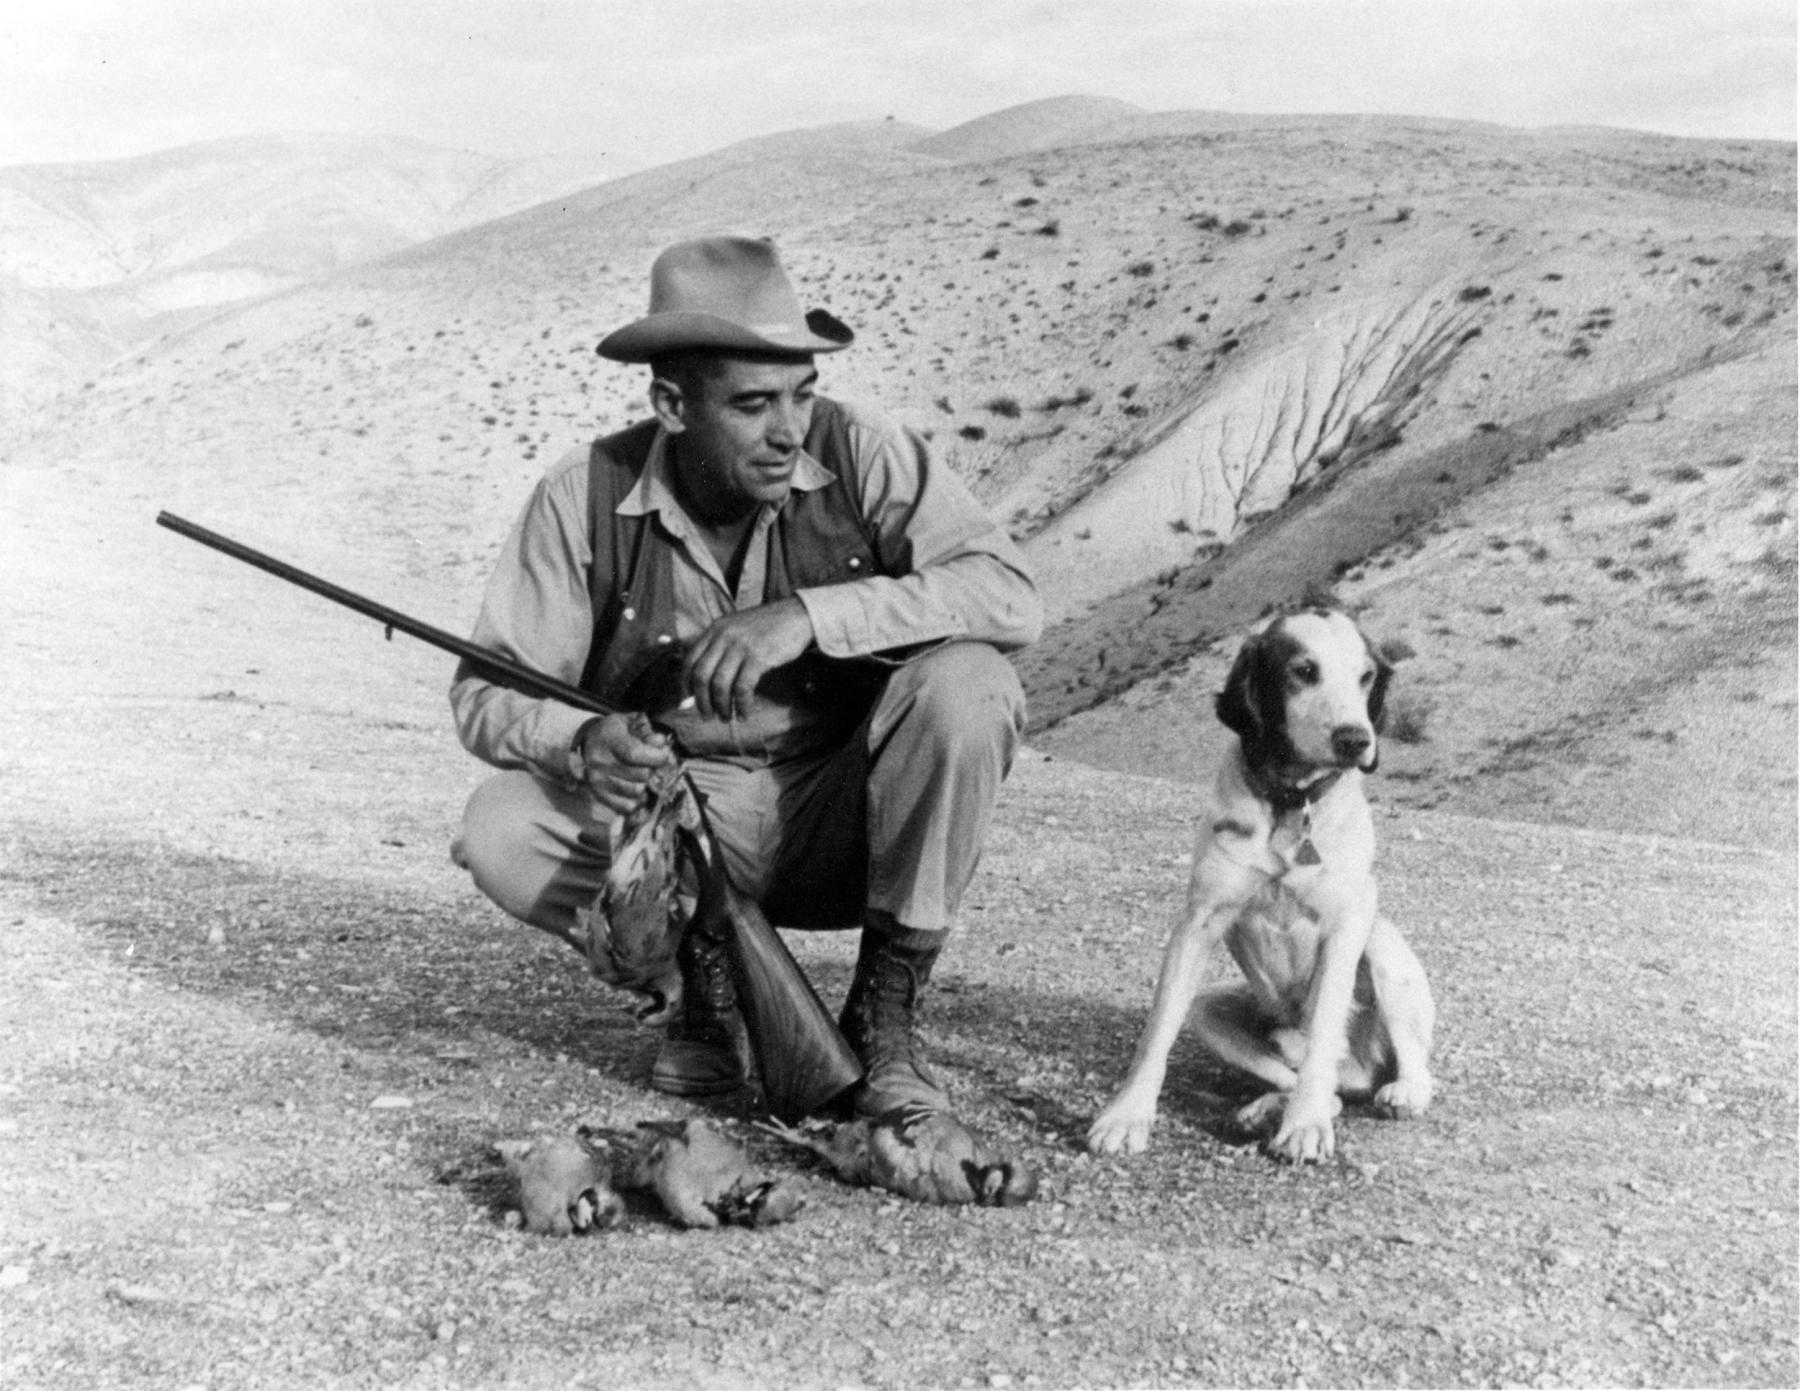 Starker Leopold was an avid hunter himself, and as a scientist, continually called for game managers to make more animals available to hunters, usually by improving habitat. Here, he pauses with gun, dog and three dead chukkar partridges in the Tremblor Range in California, November 1955. Leopold collection, University of Wisconsin-Madison archives.